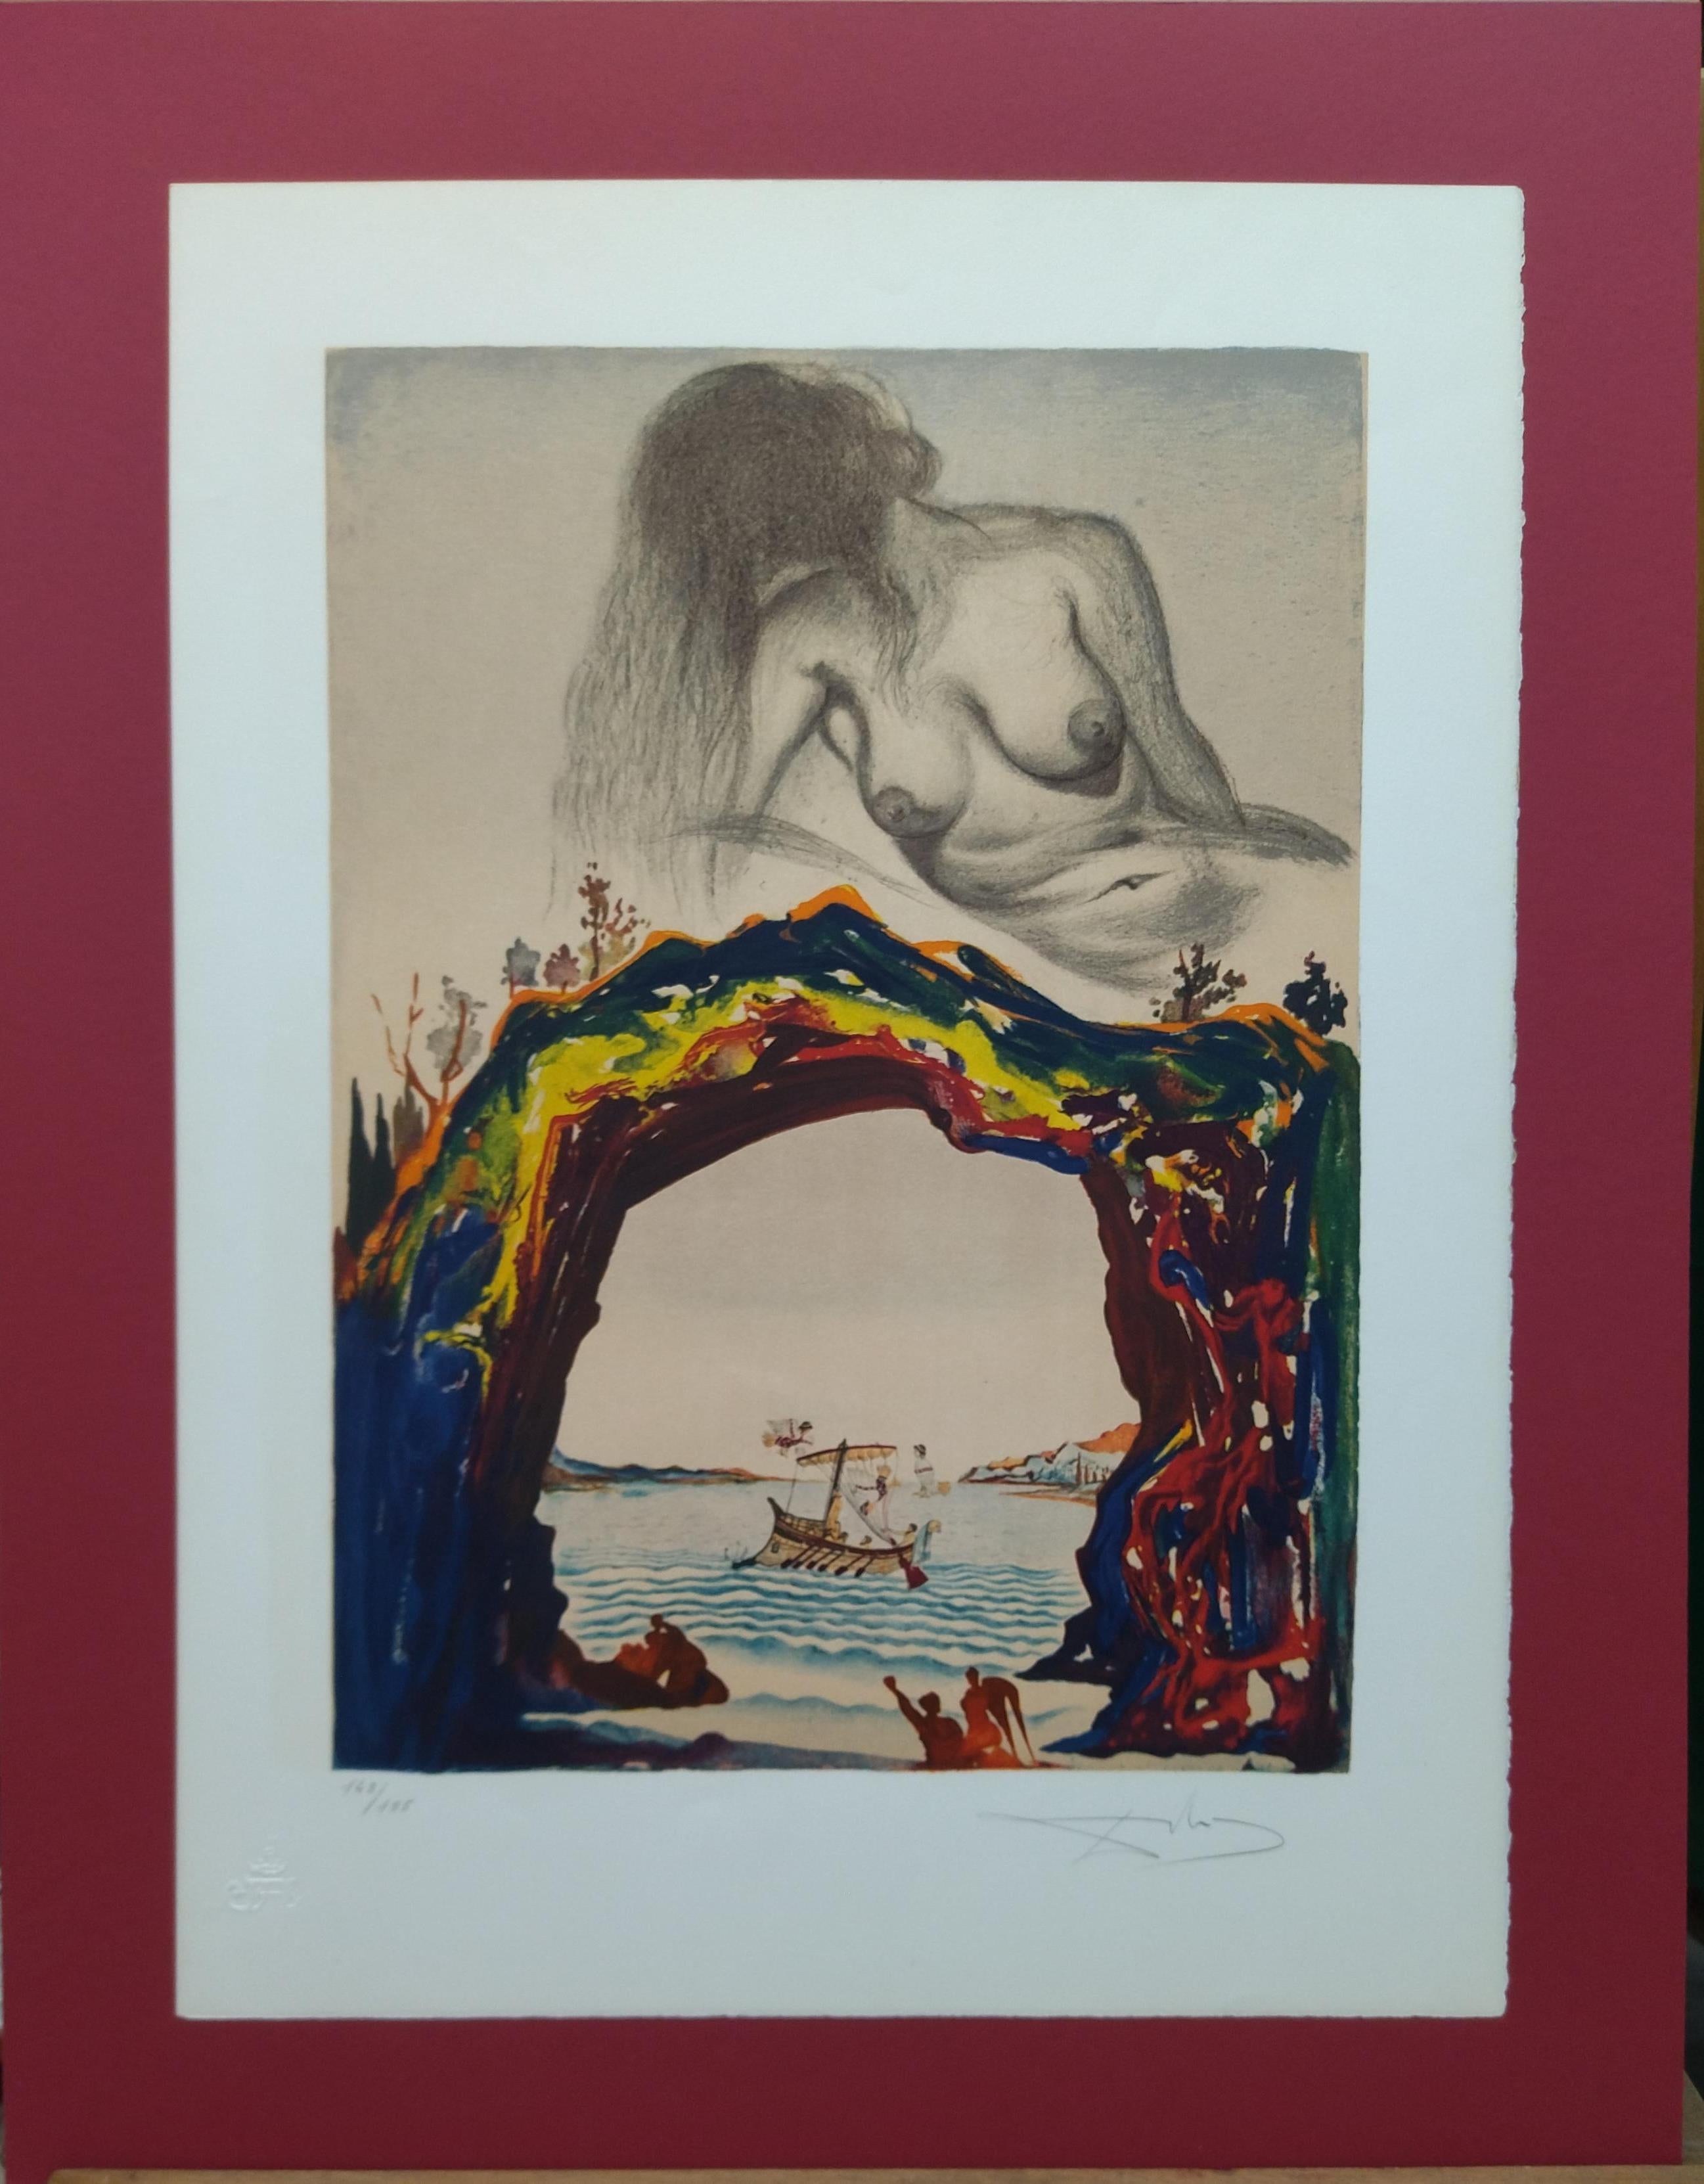 Work of the Spanish artist SALVADOR DALI.
edition of 195 copies + several E.A.
ej 149/195
certificate


 DALÍ, Salvador (Figueras, Gerona, 1904-1989). 
During its early years, Dalí discovers contemporary painting during a family visit to Cadaqués,